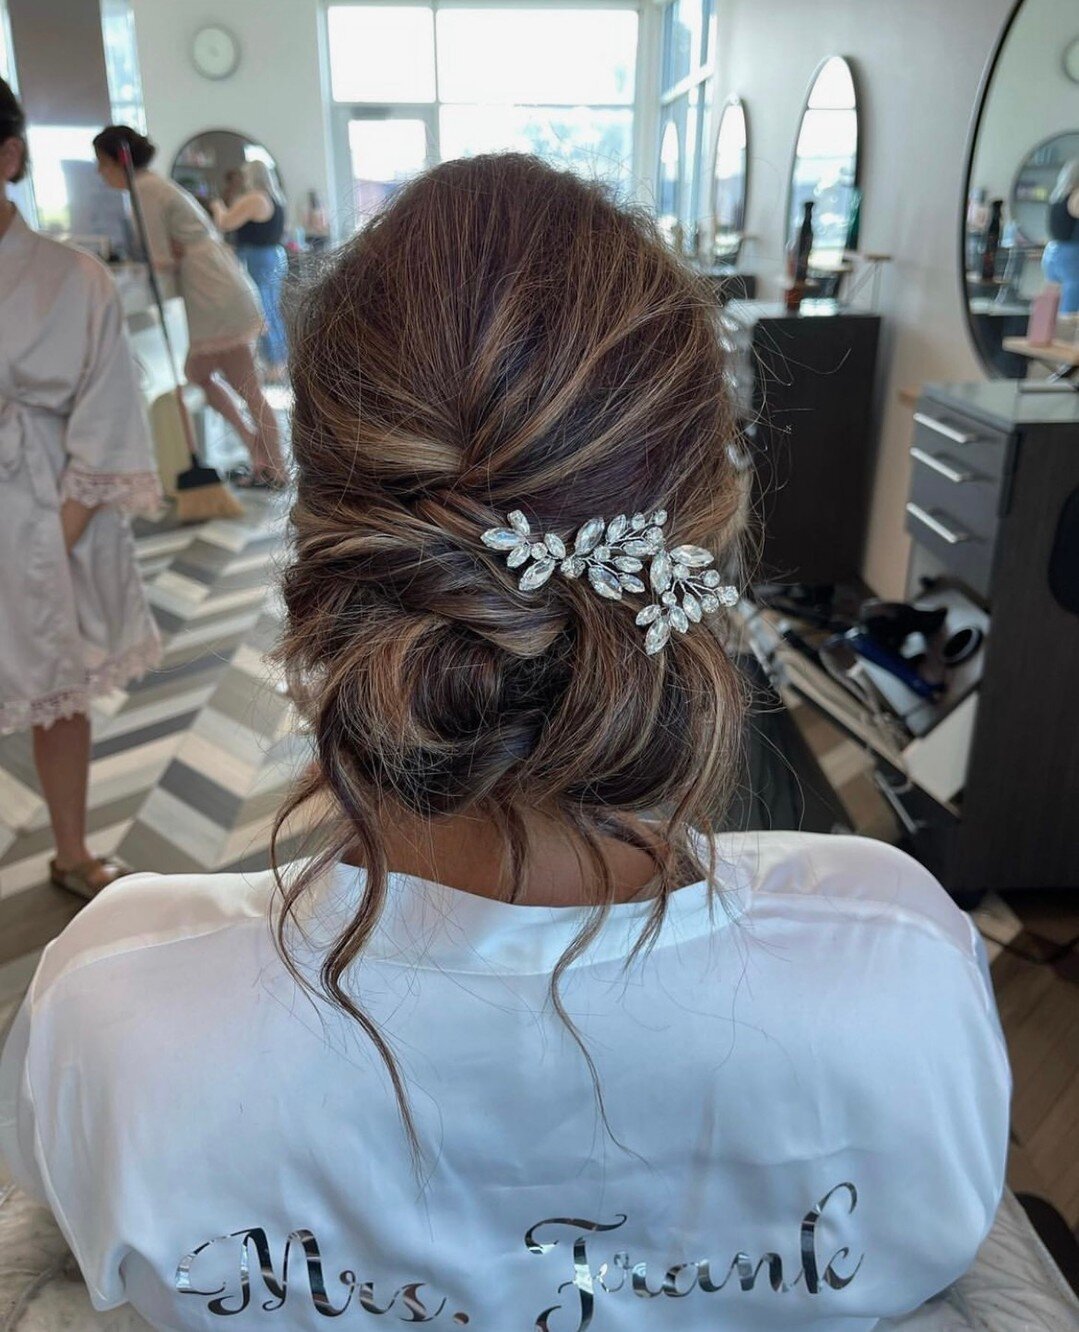 Creating dreamy looks for our beautiful brides!

Stylist: @hairby.zoekoberoski